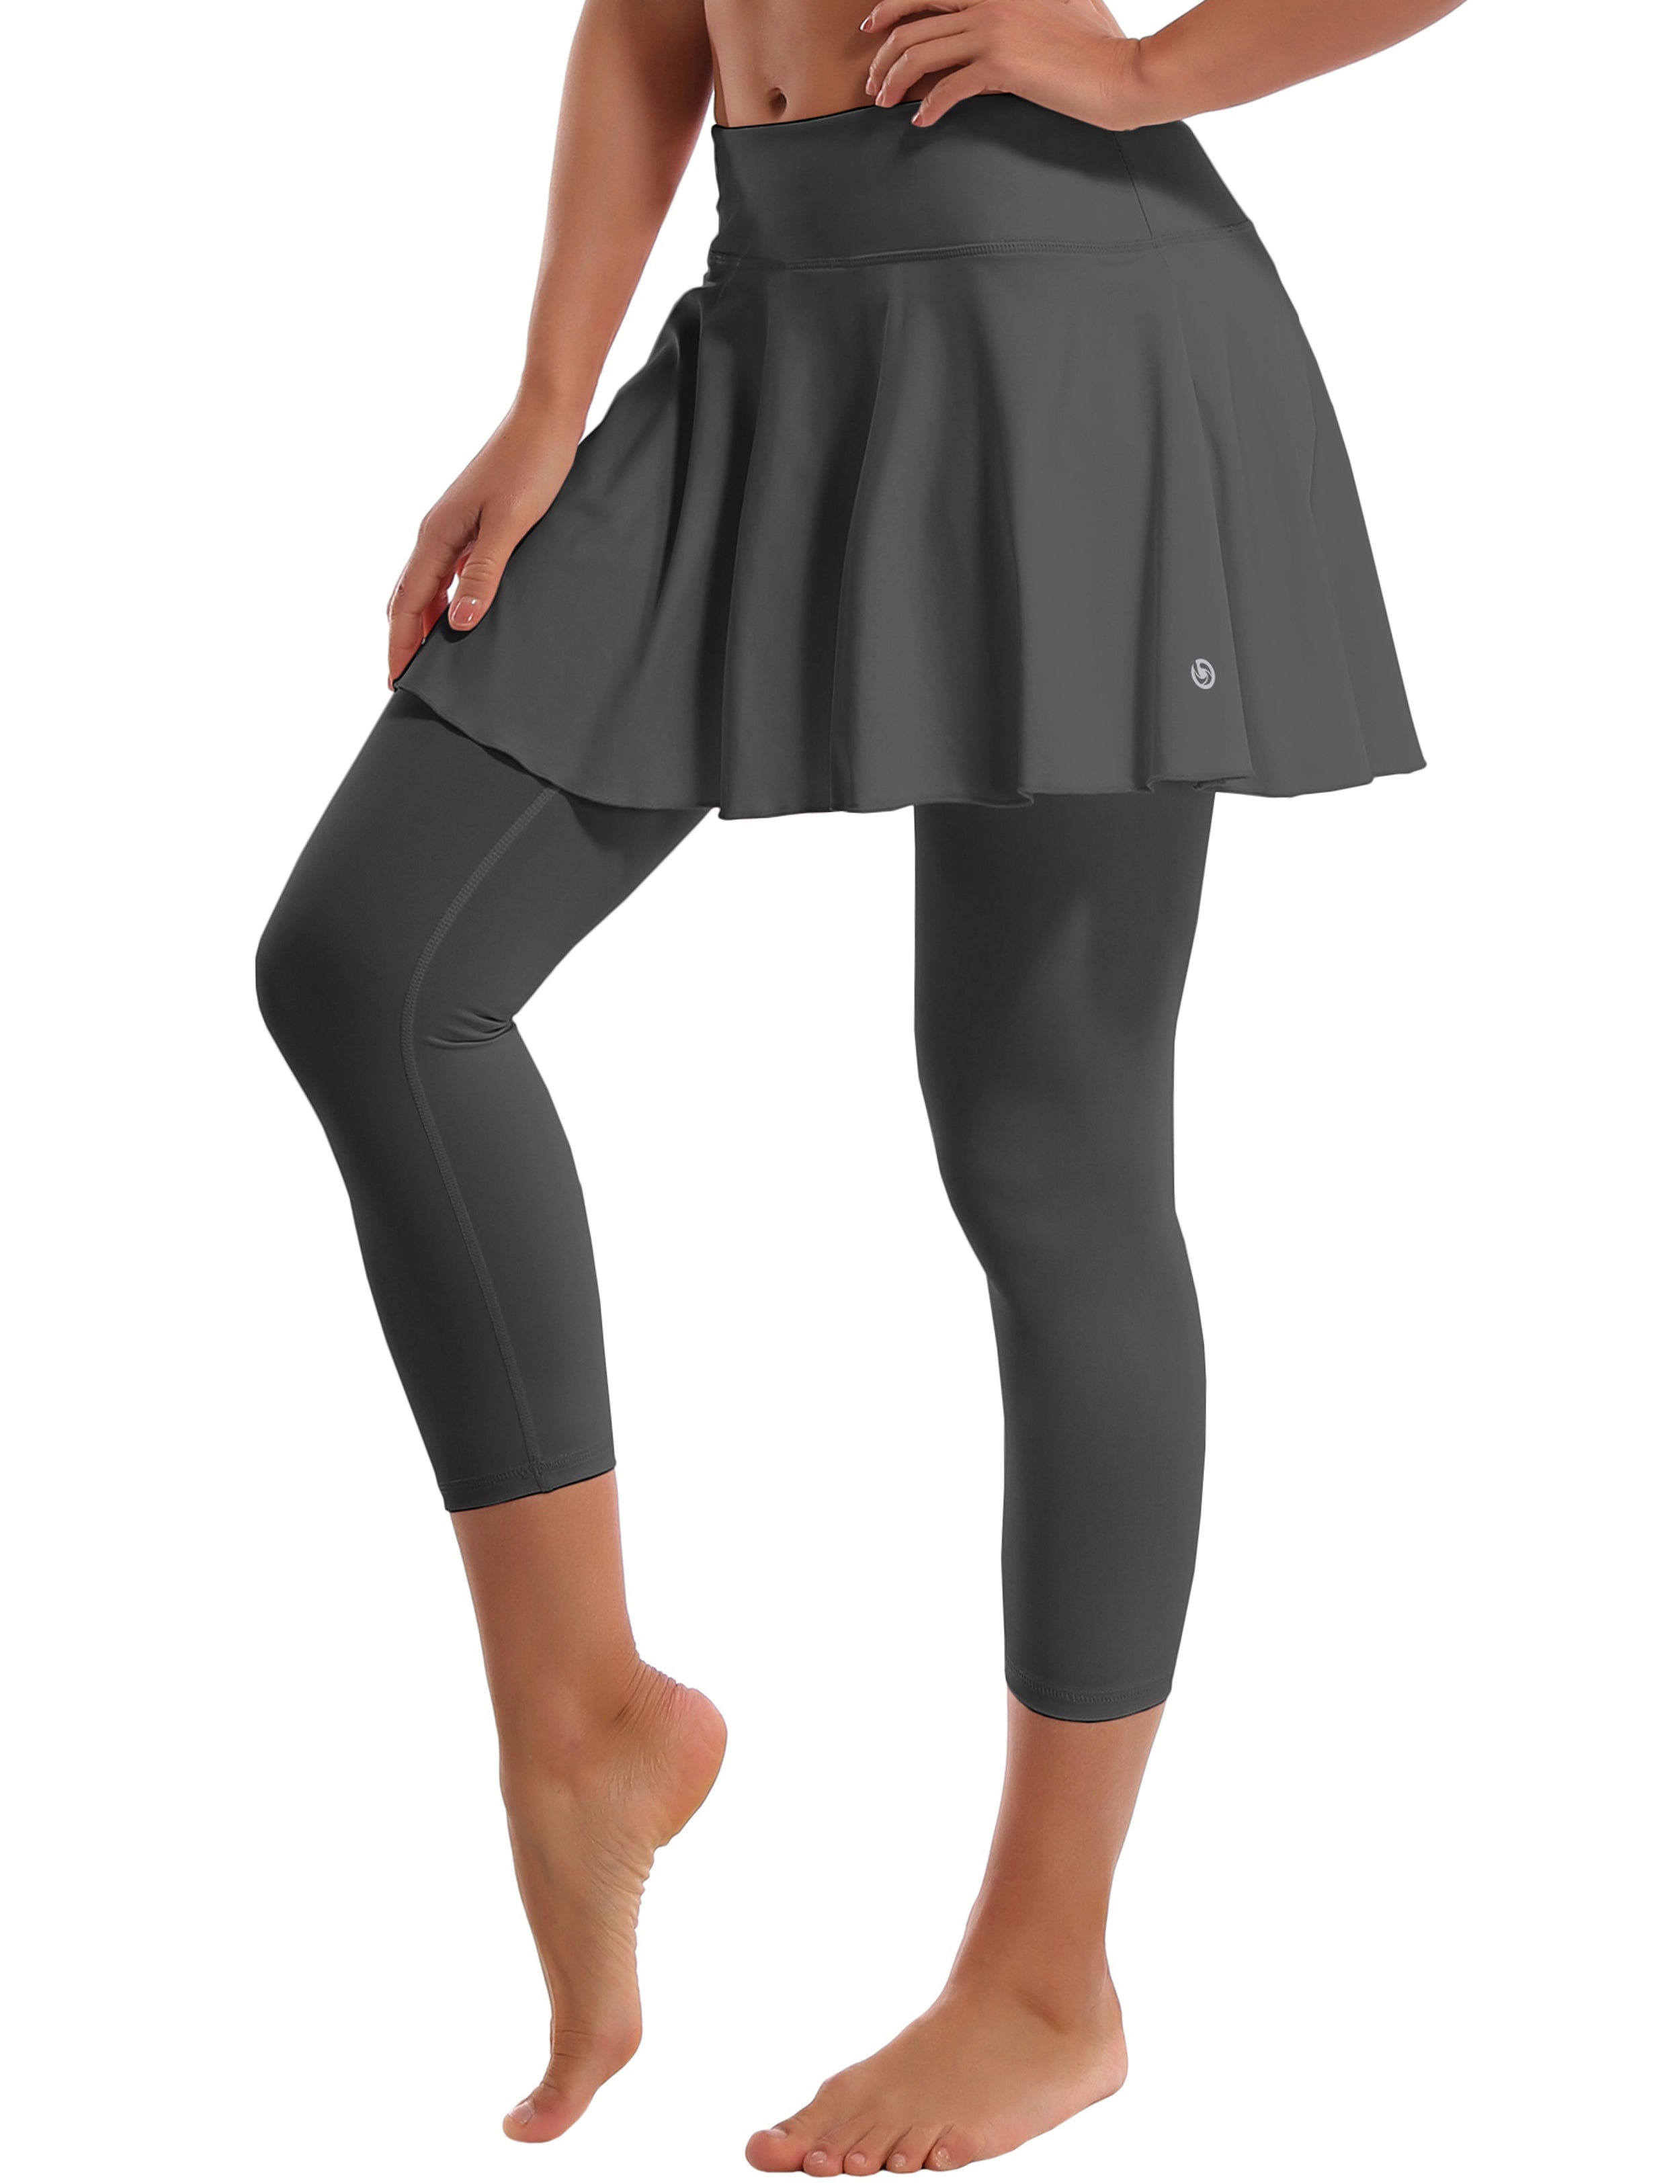 19" Capris Tennis Golf Skirted Leggings with Pockets shadowcharcoal 80%Nylon/20%Spandex UPF 50+ sun protection Elastic closure Lightweight, Wrinkle Moisture wicking Quick drying Secure & comfortable two layer Hidden pocket